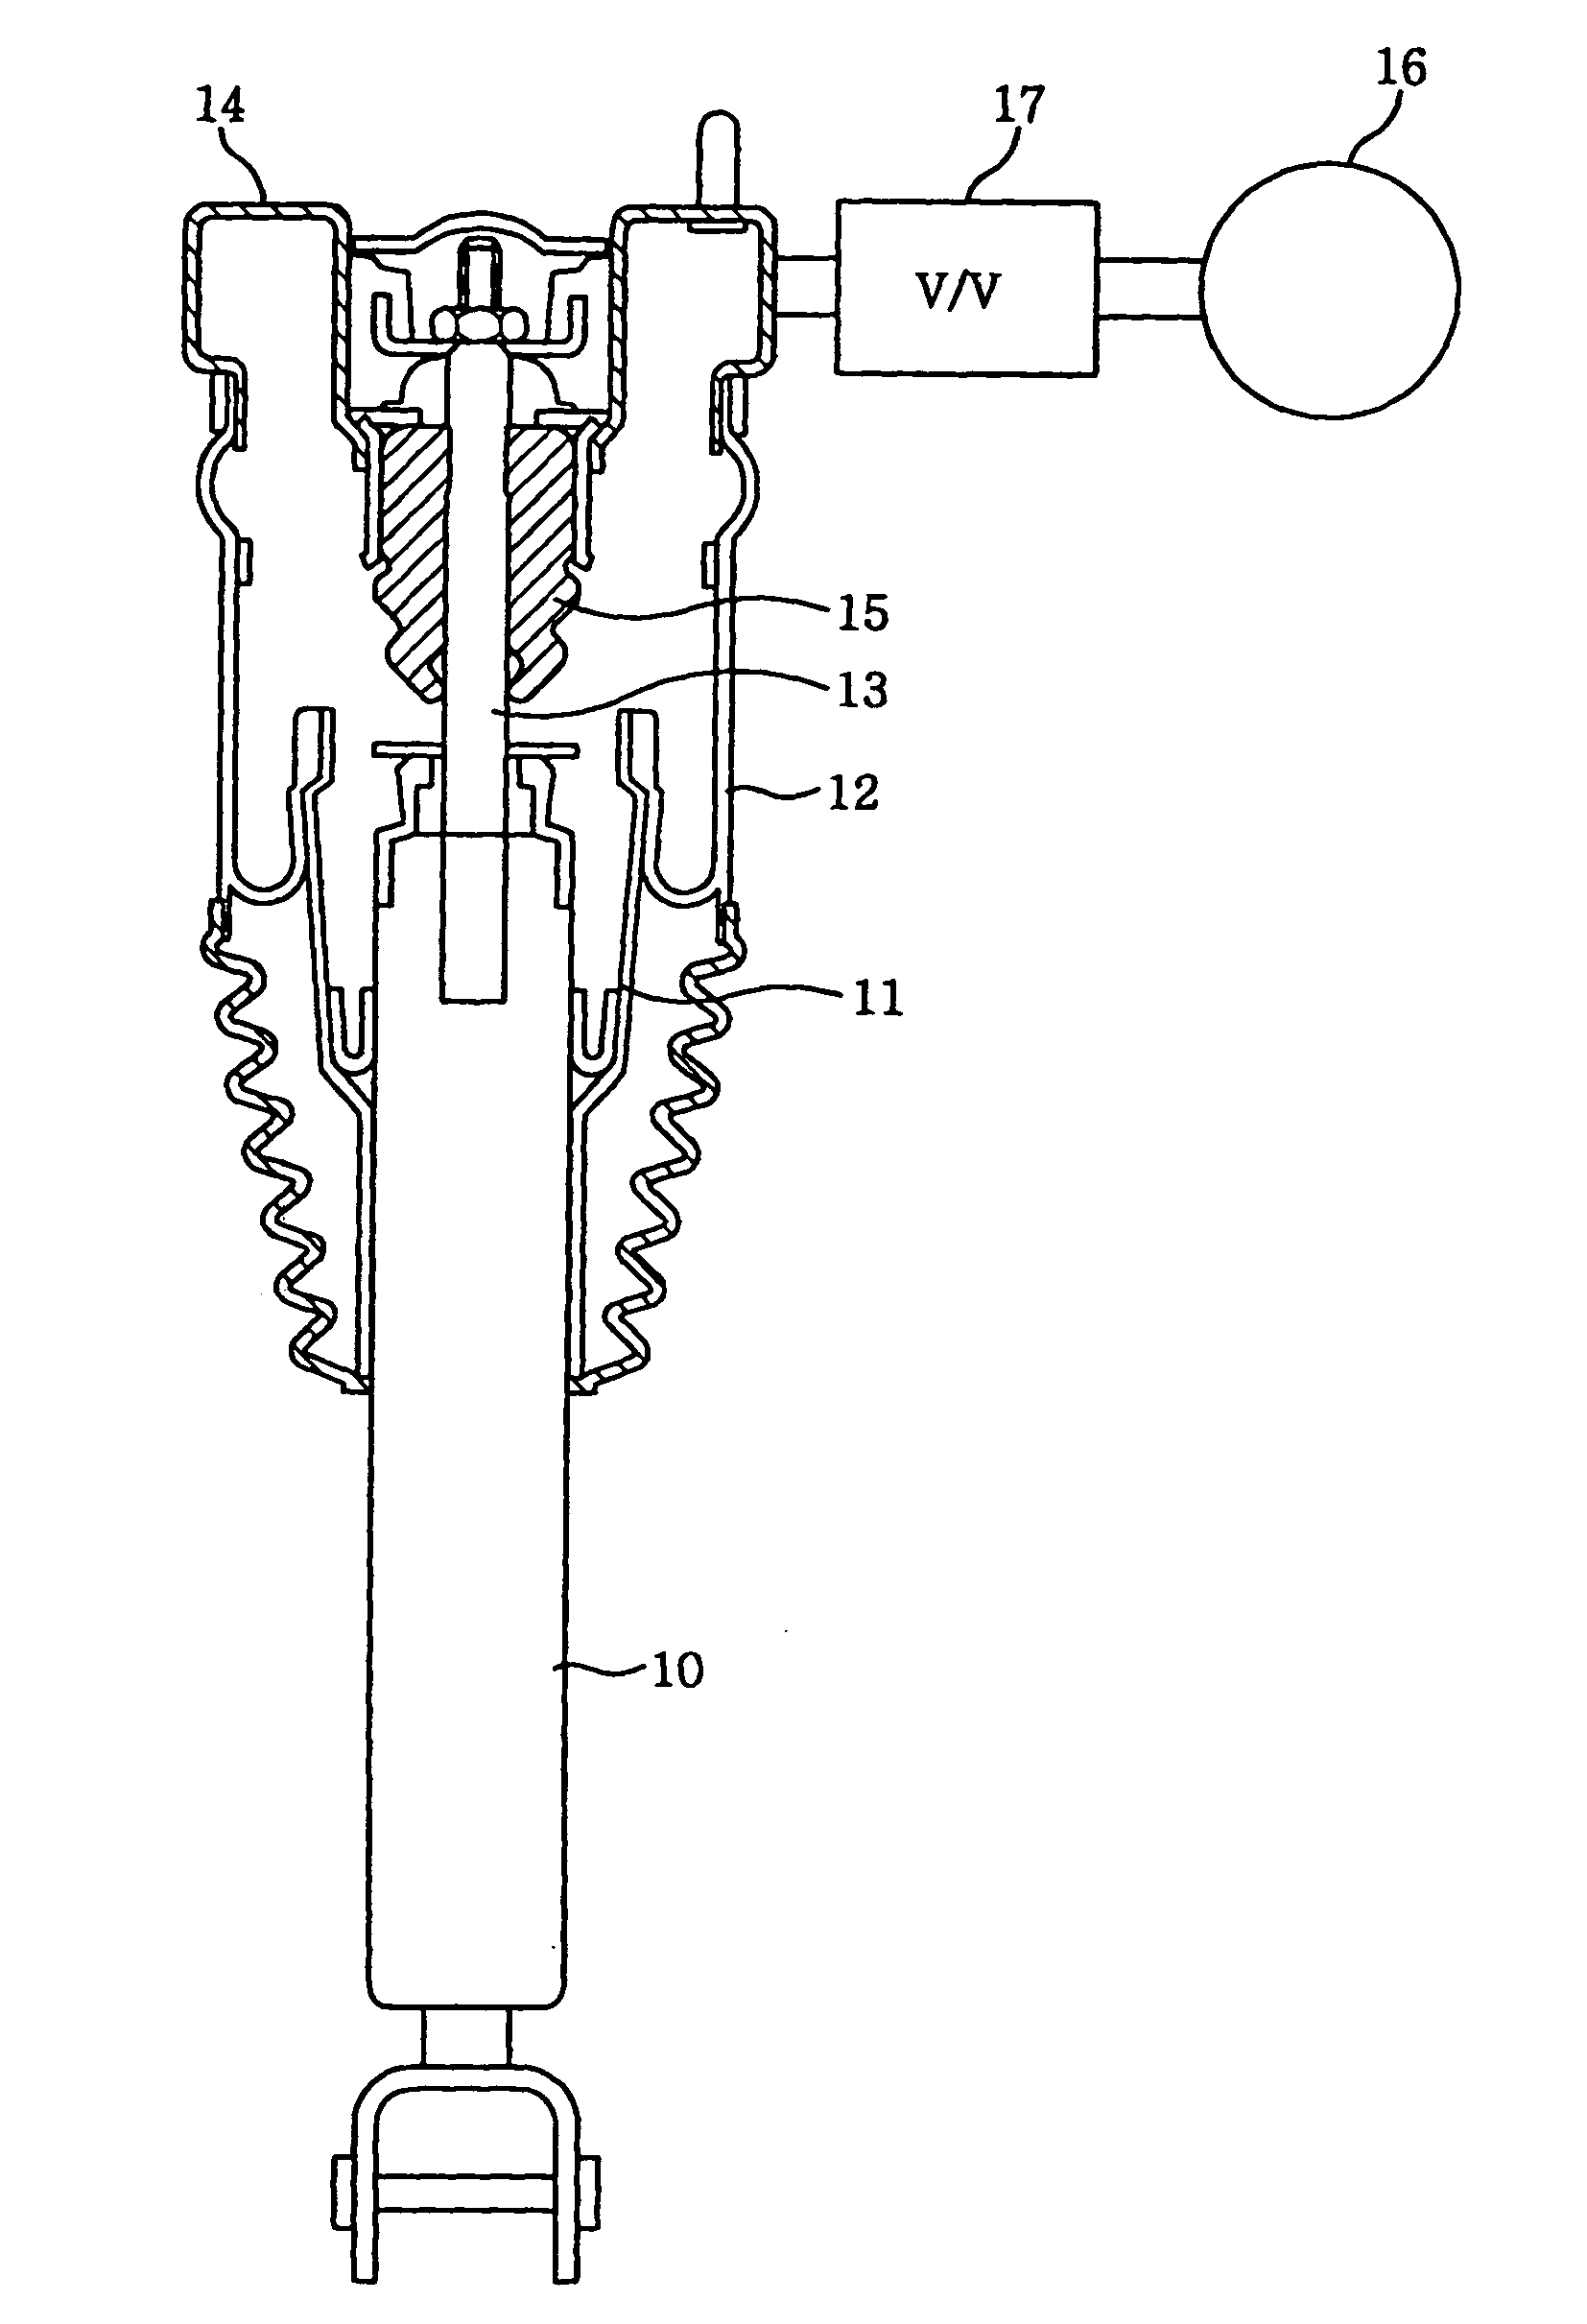 Air suspension and electronically controlled suspension system